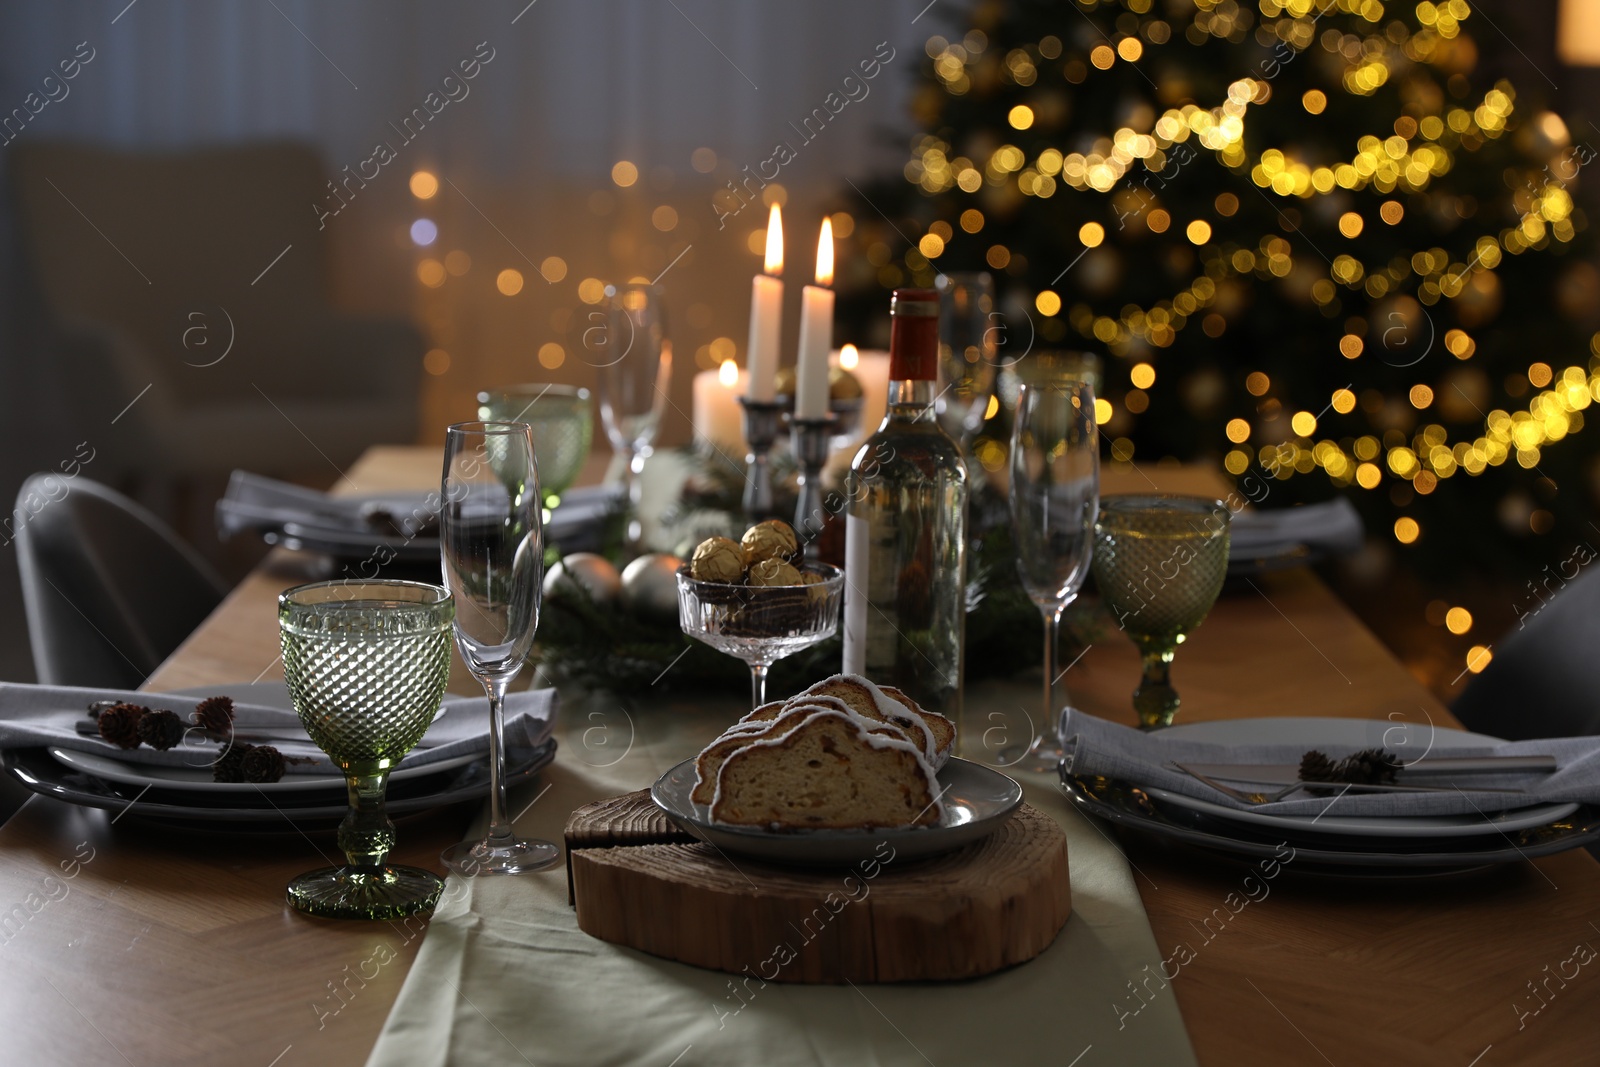 Photo of Christmas table setting with festive decor and dishware in room